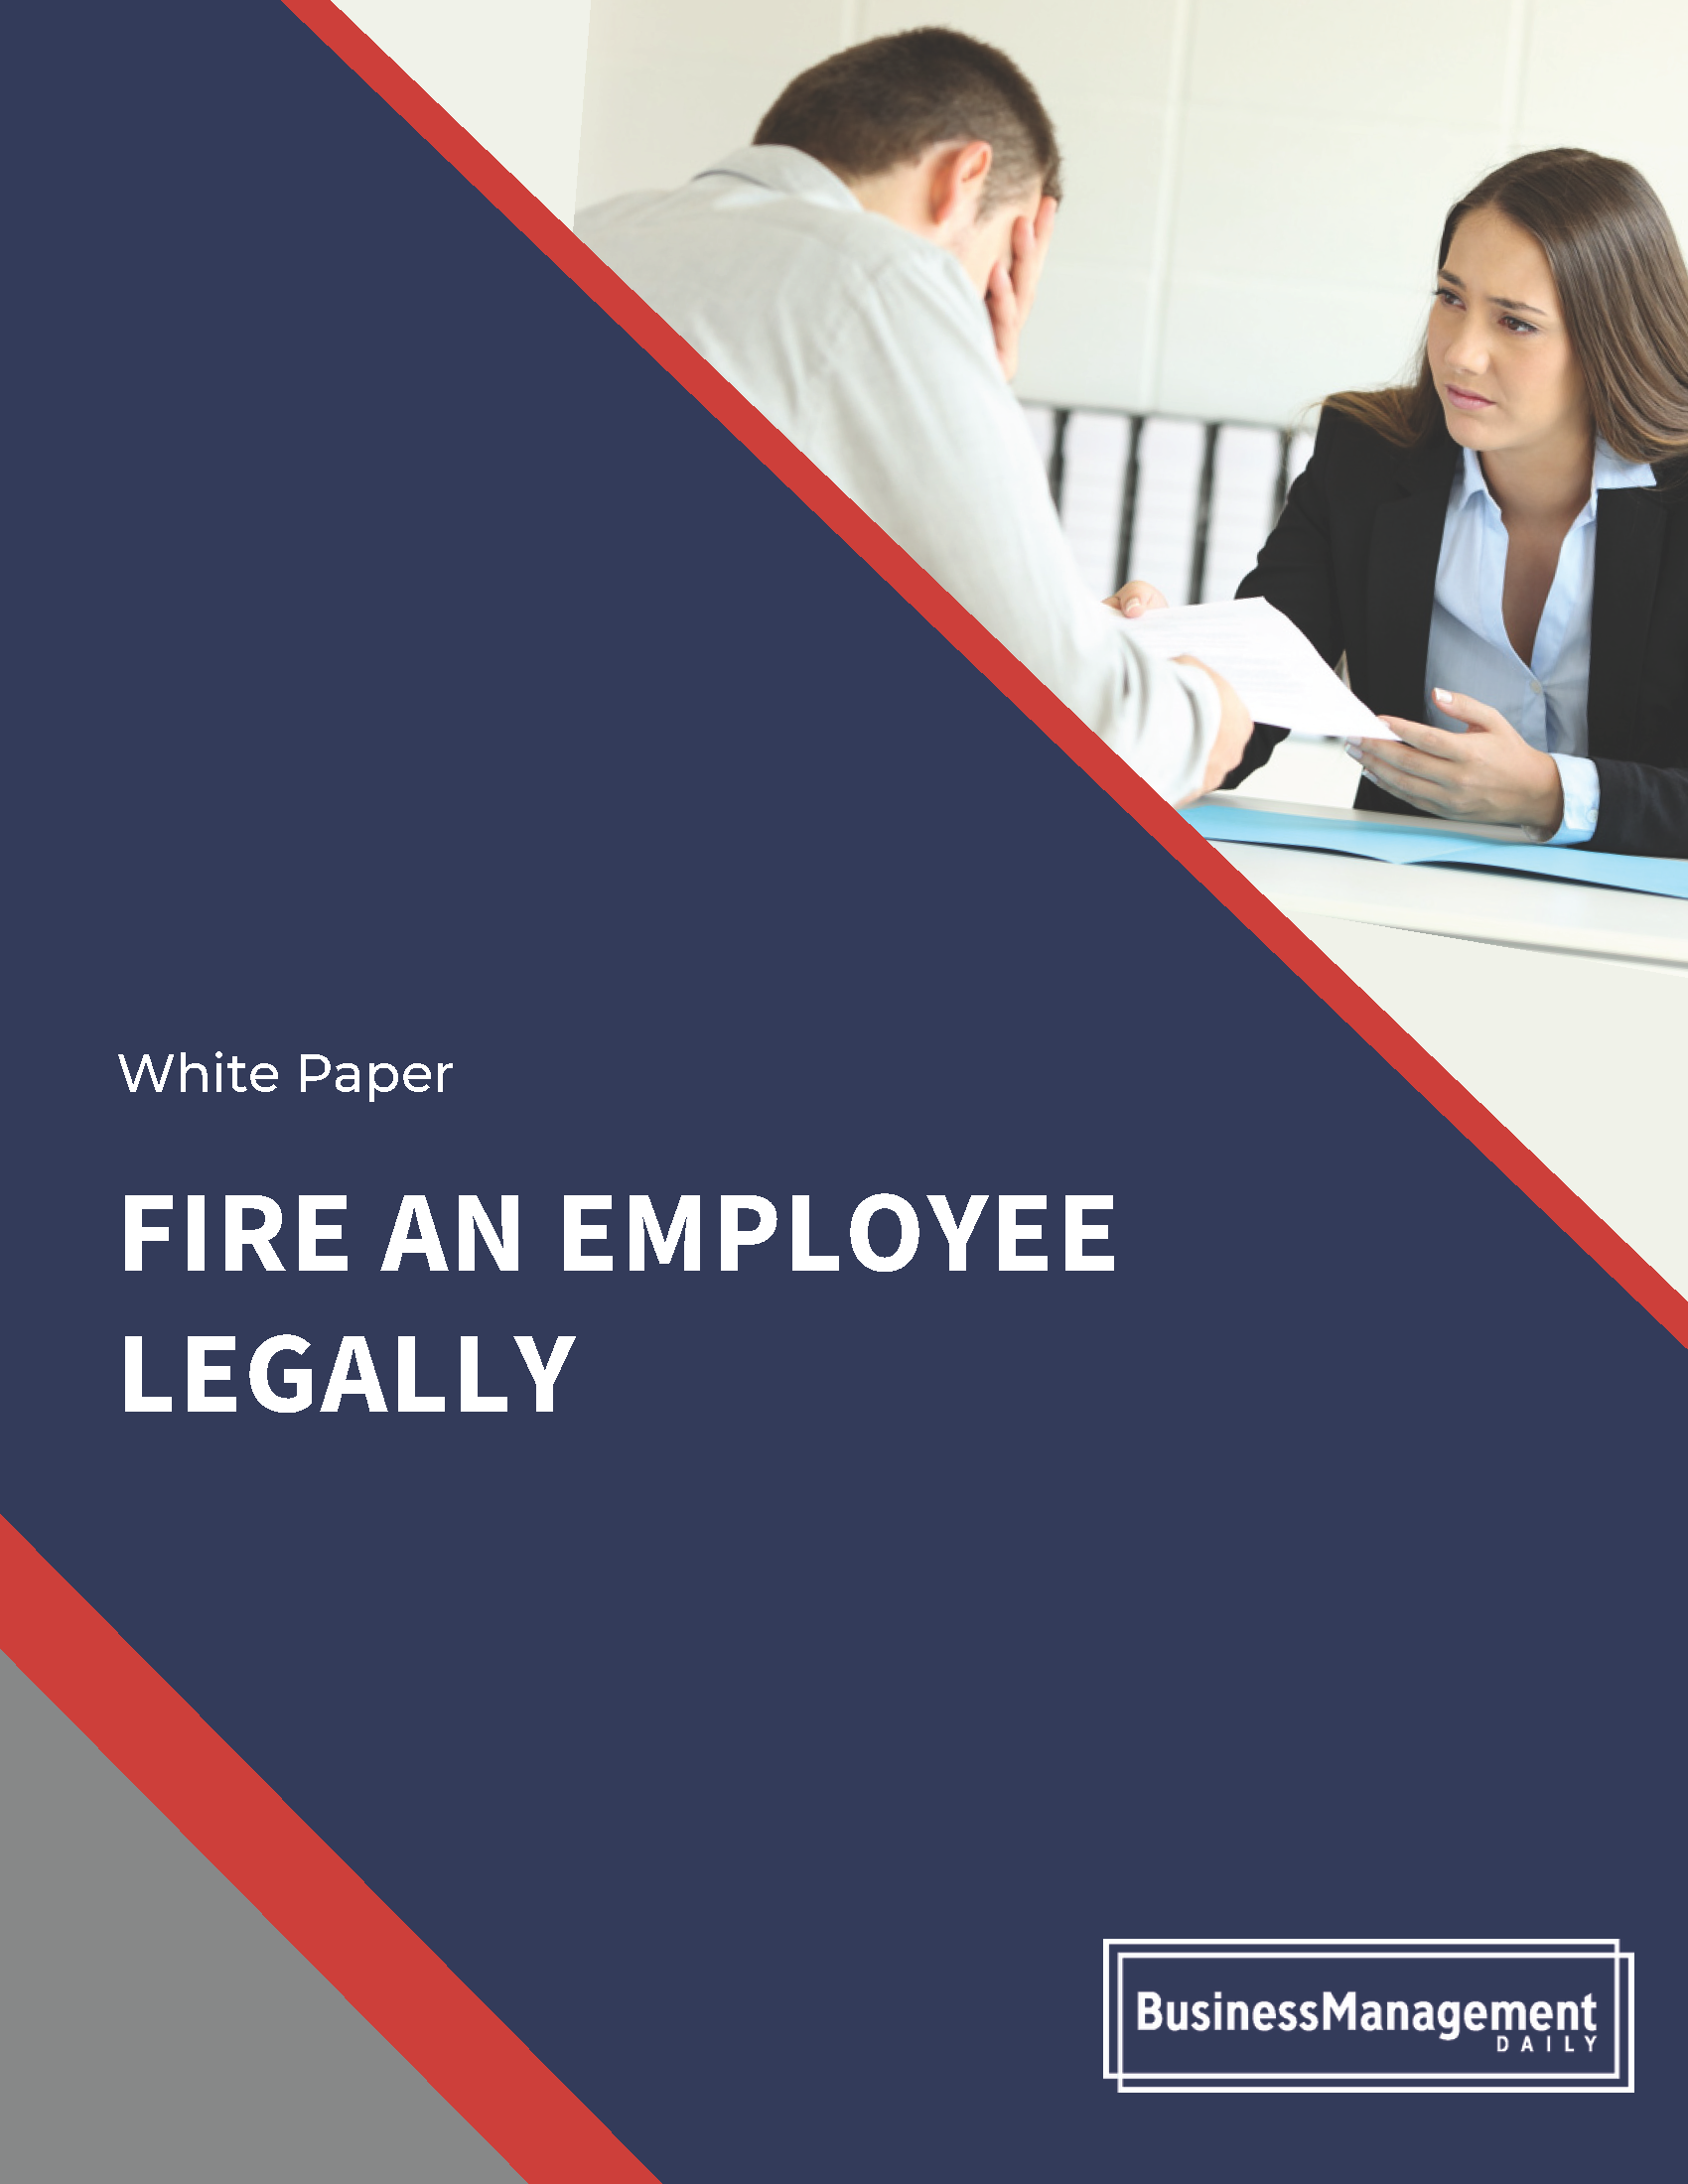 How to Fire an Employee the Legal Way